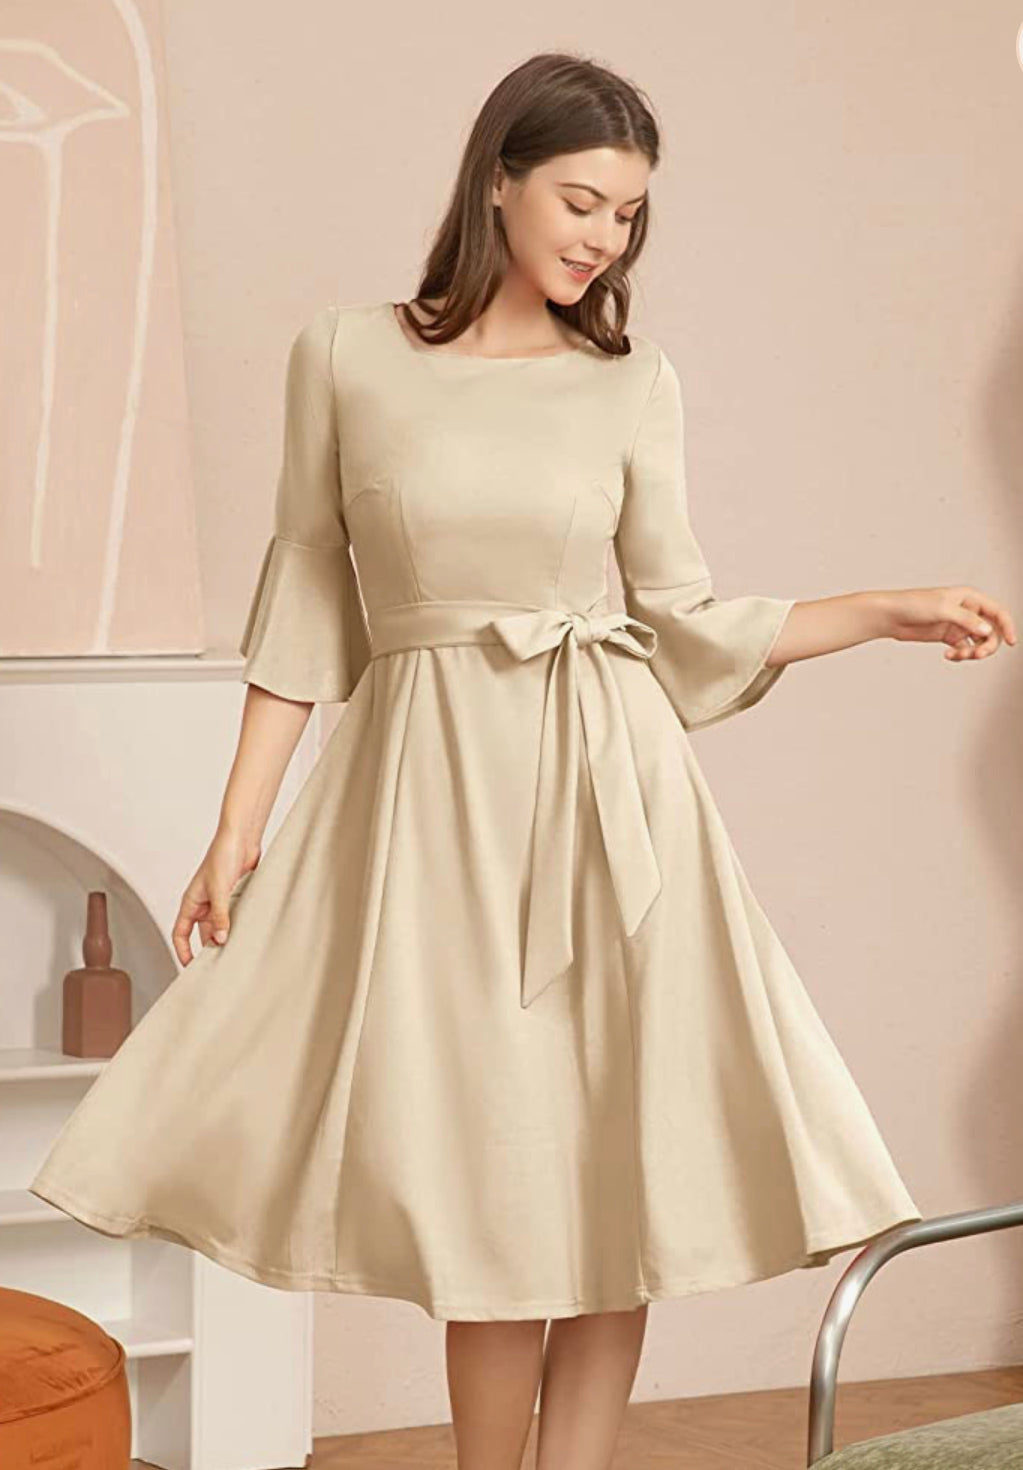 Elegant Bell Sleeve Cocktail Dress, Sizes Small - 3XLarge (Champagne)